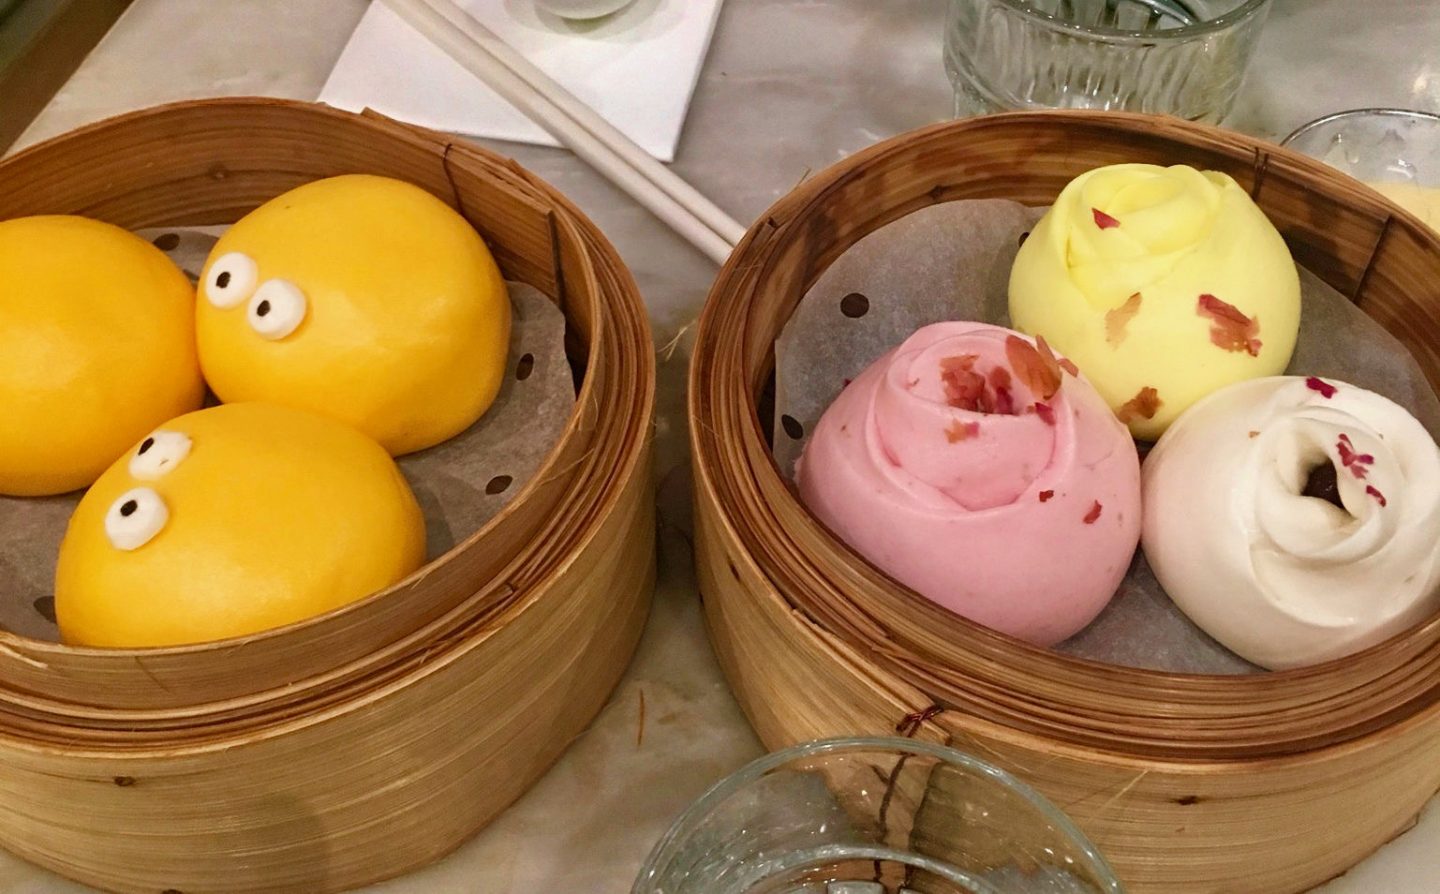 Custard buns made to look like little yellow creatures with googly eyes, and rose shaped rose buns, some of the best food in Hong Kong